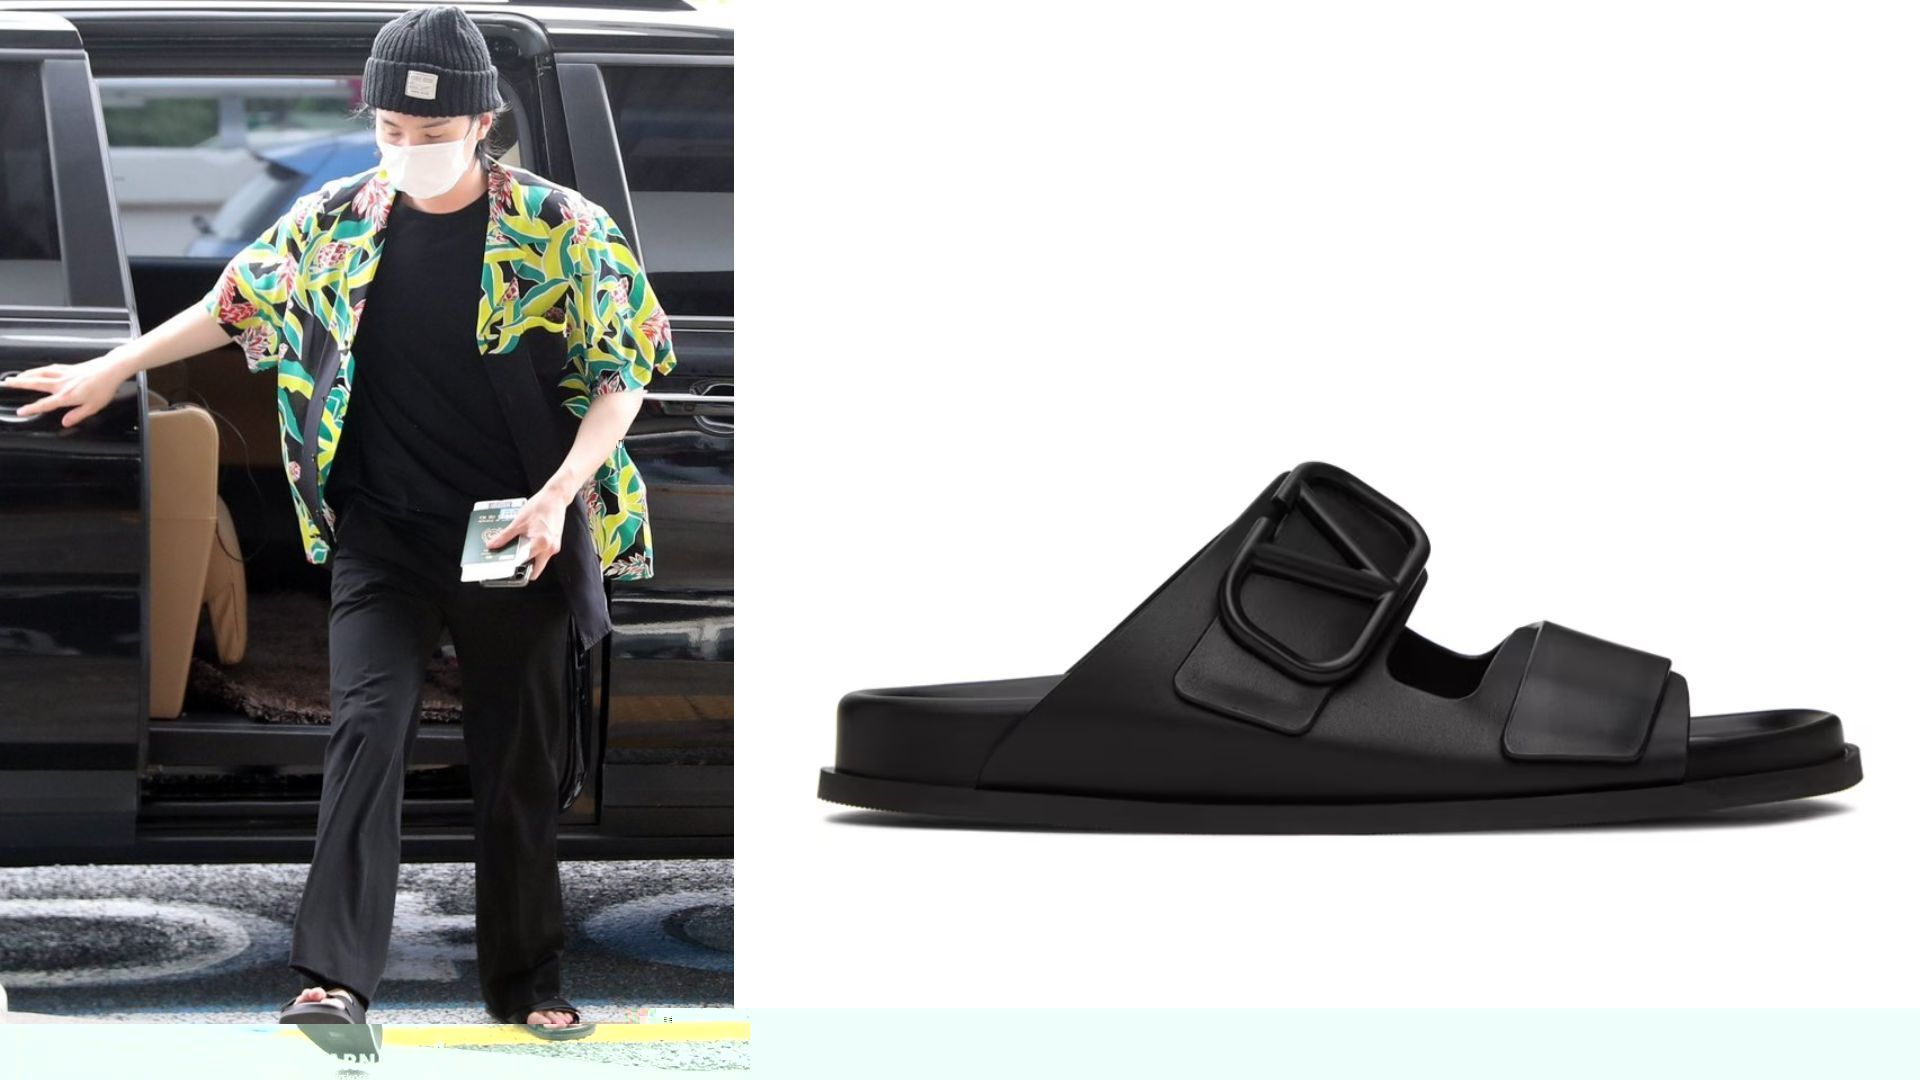 BTS suga expensive shoe collection